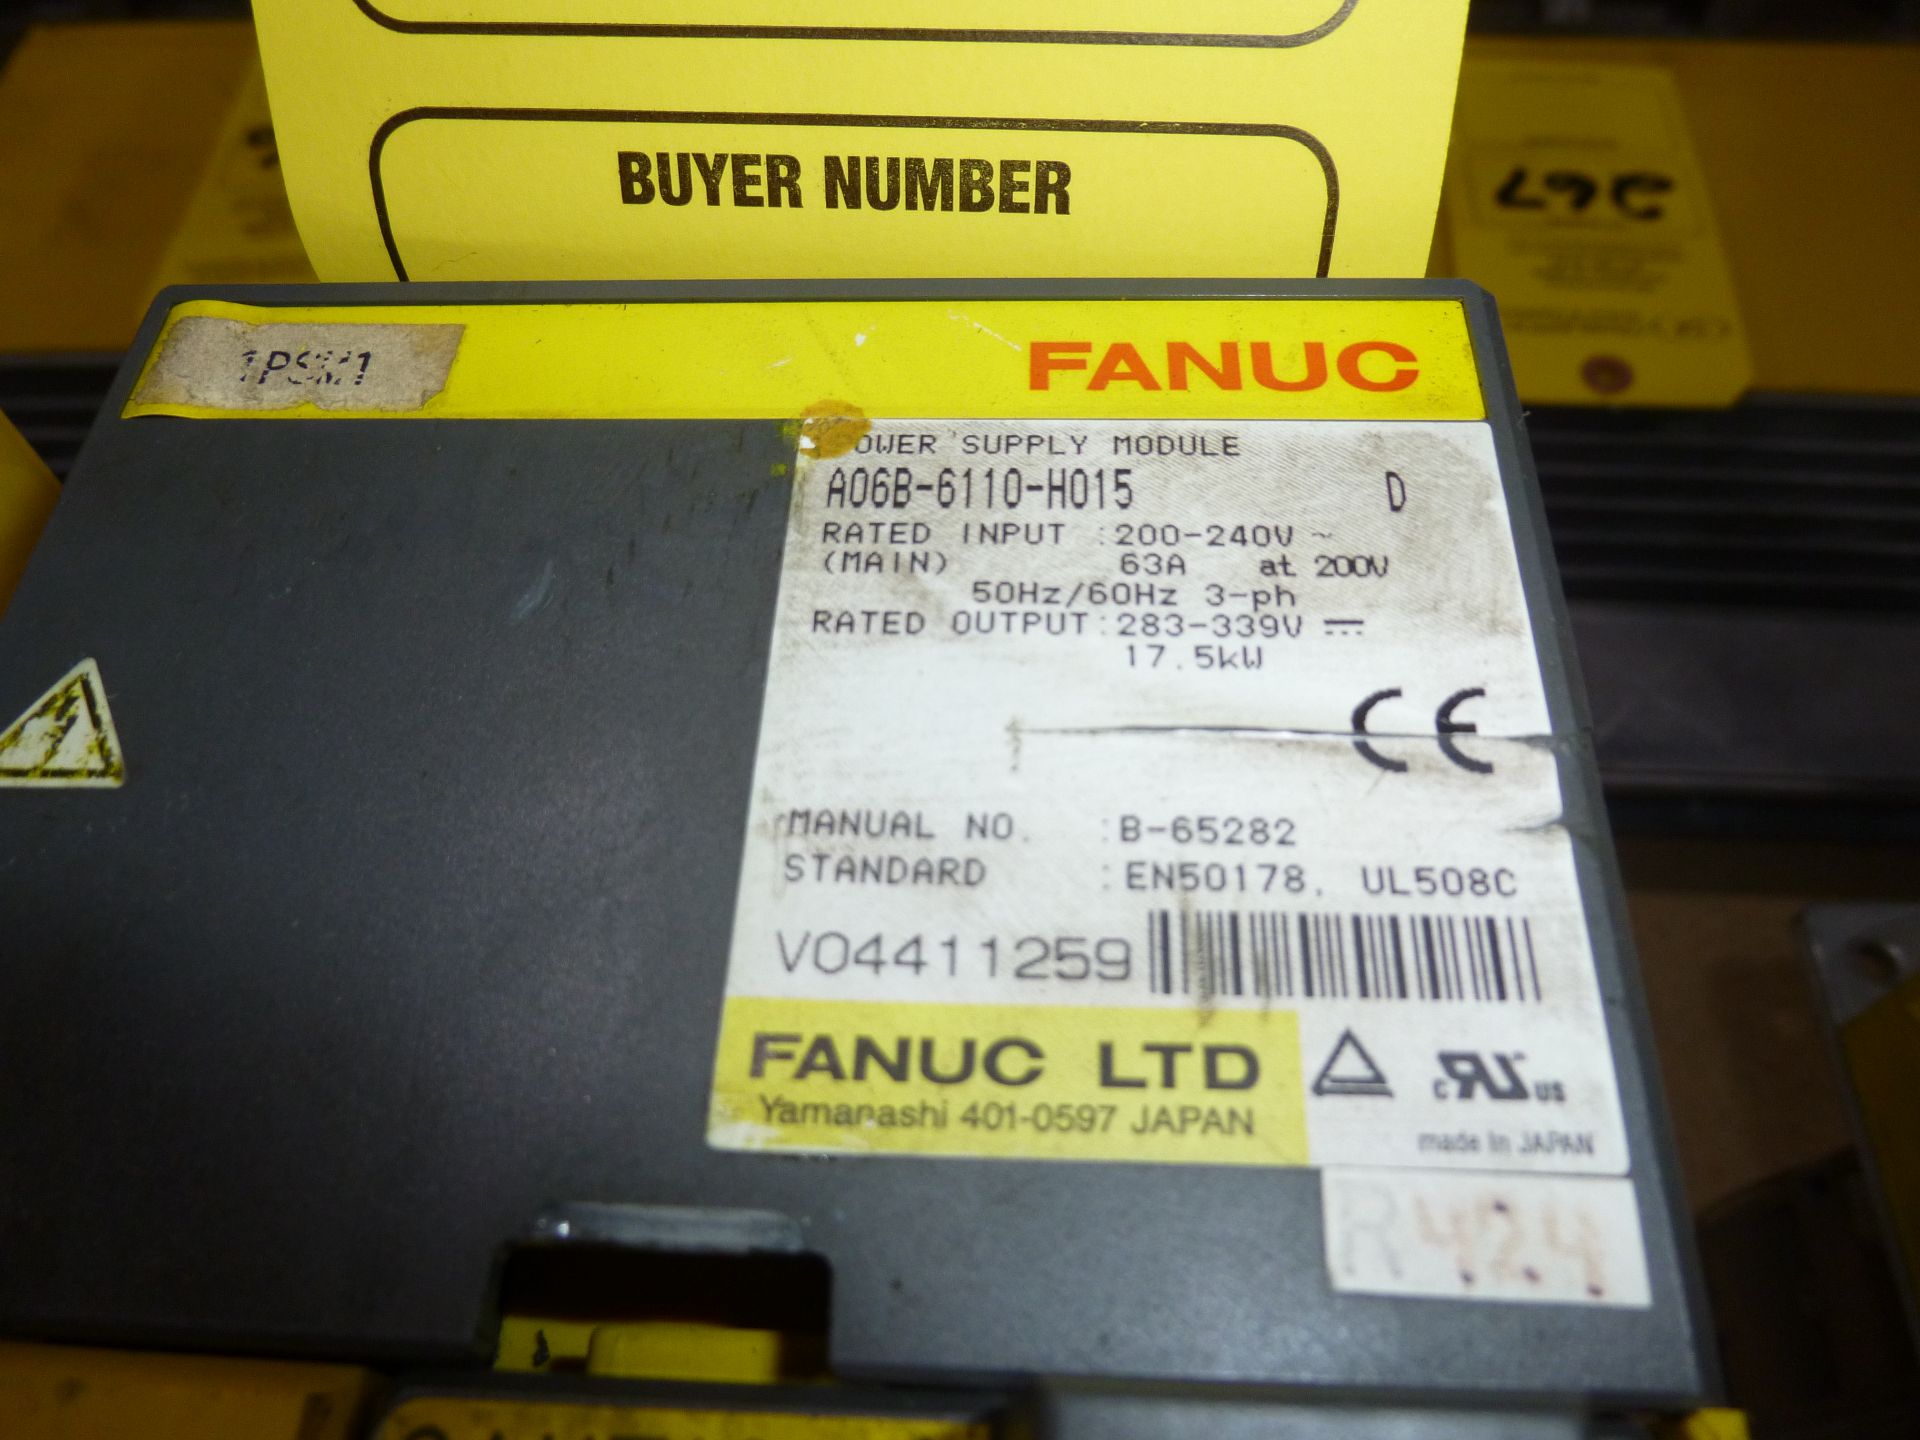 Fanuc power suppy module model A06B-6110-H015, as always with Brolyn LLC auctions, all lots can be - Image 2 of 2